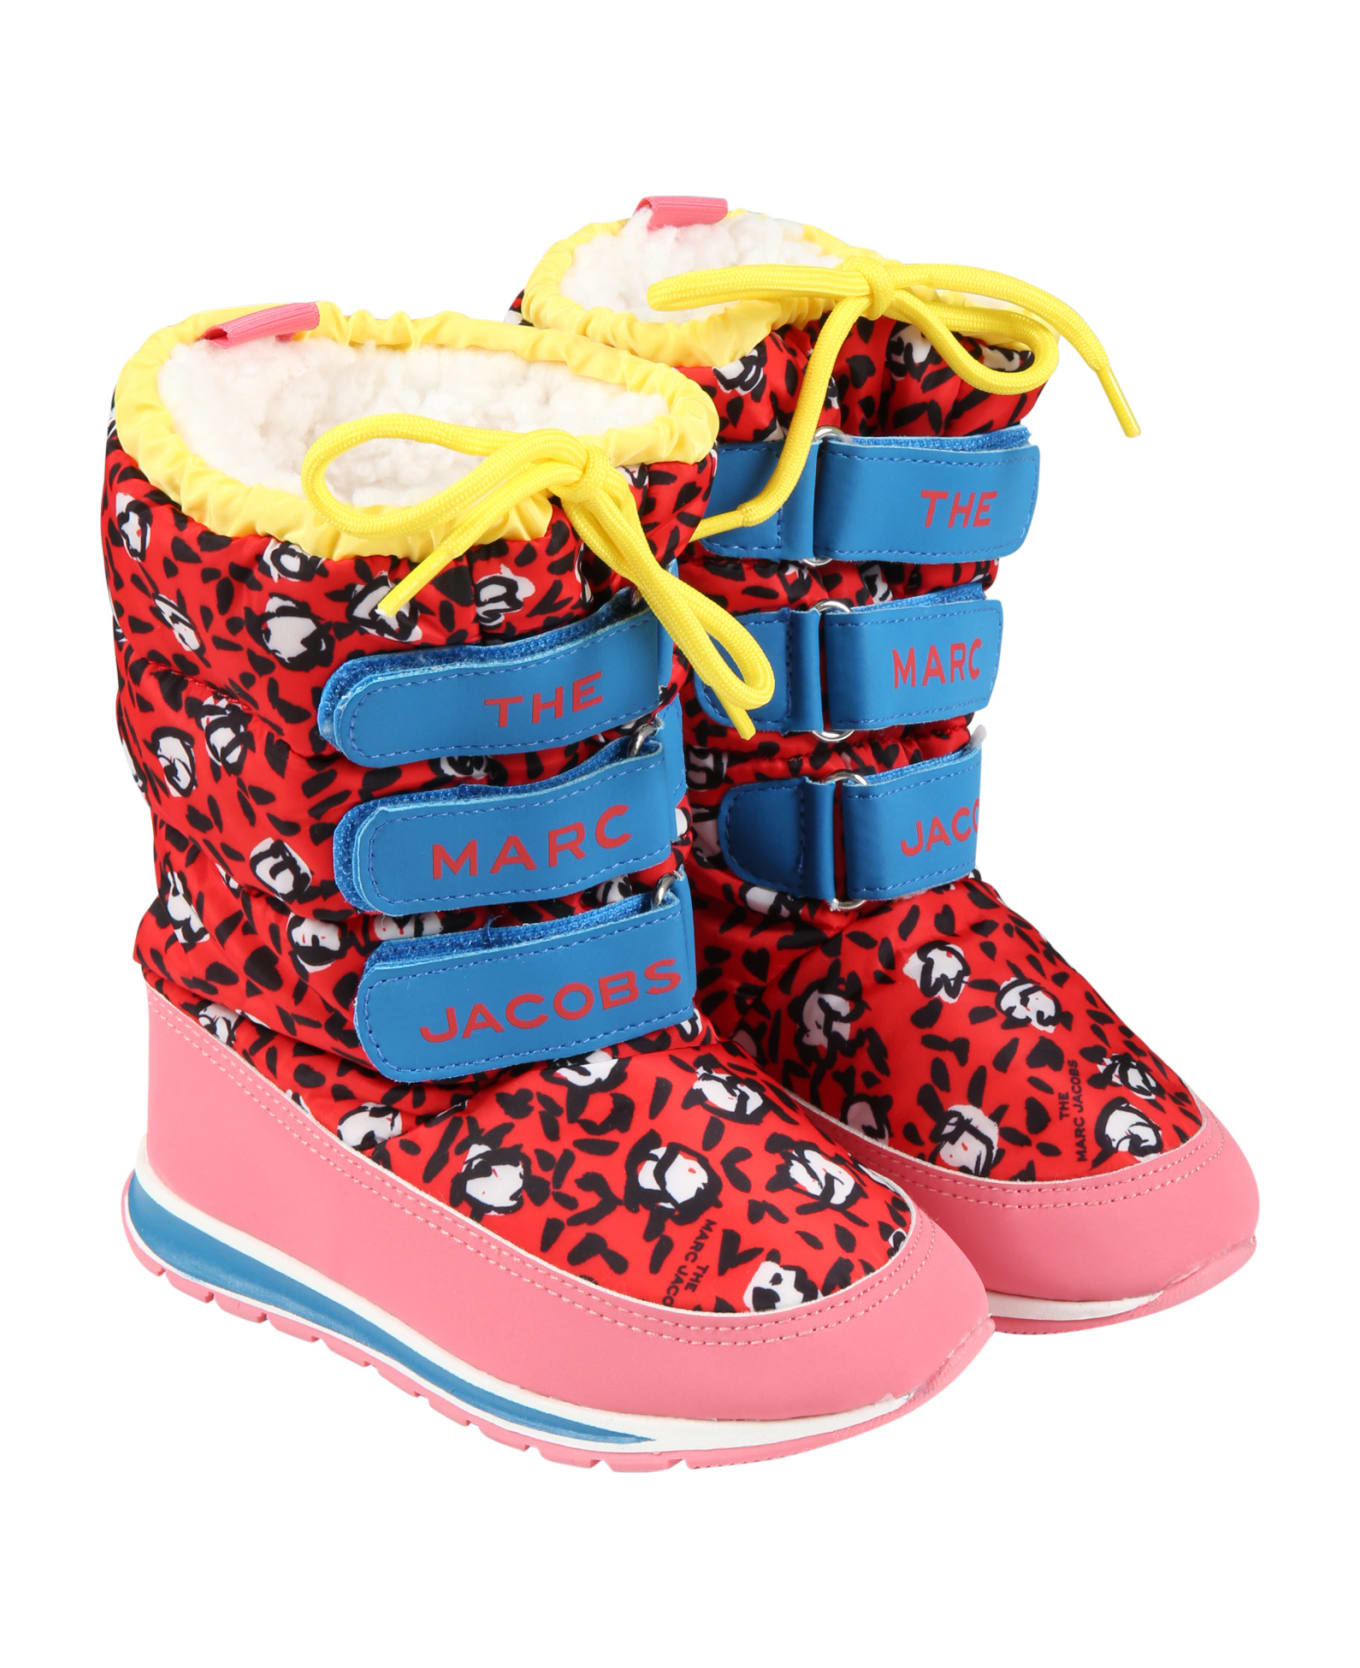 Marc Jacobs Red Snow Boots For Girl - Red